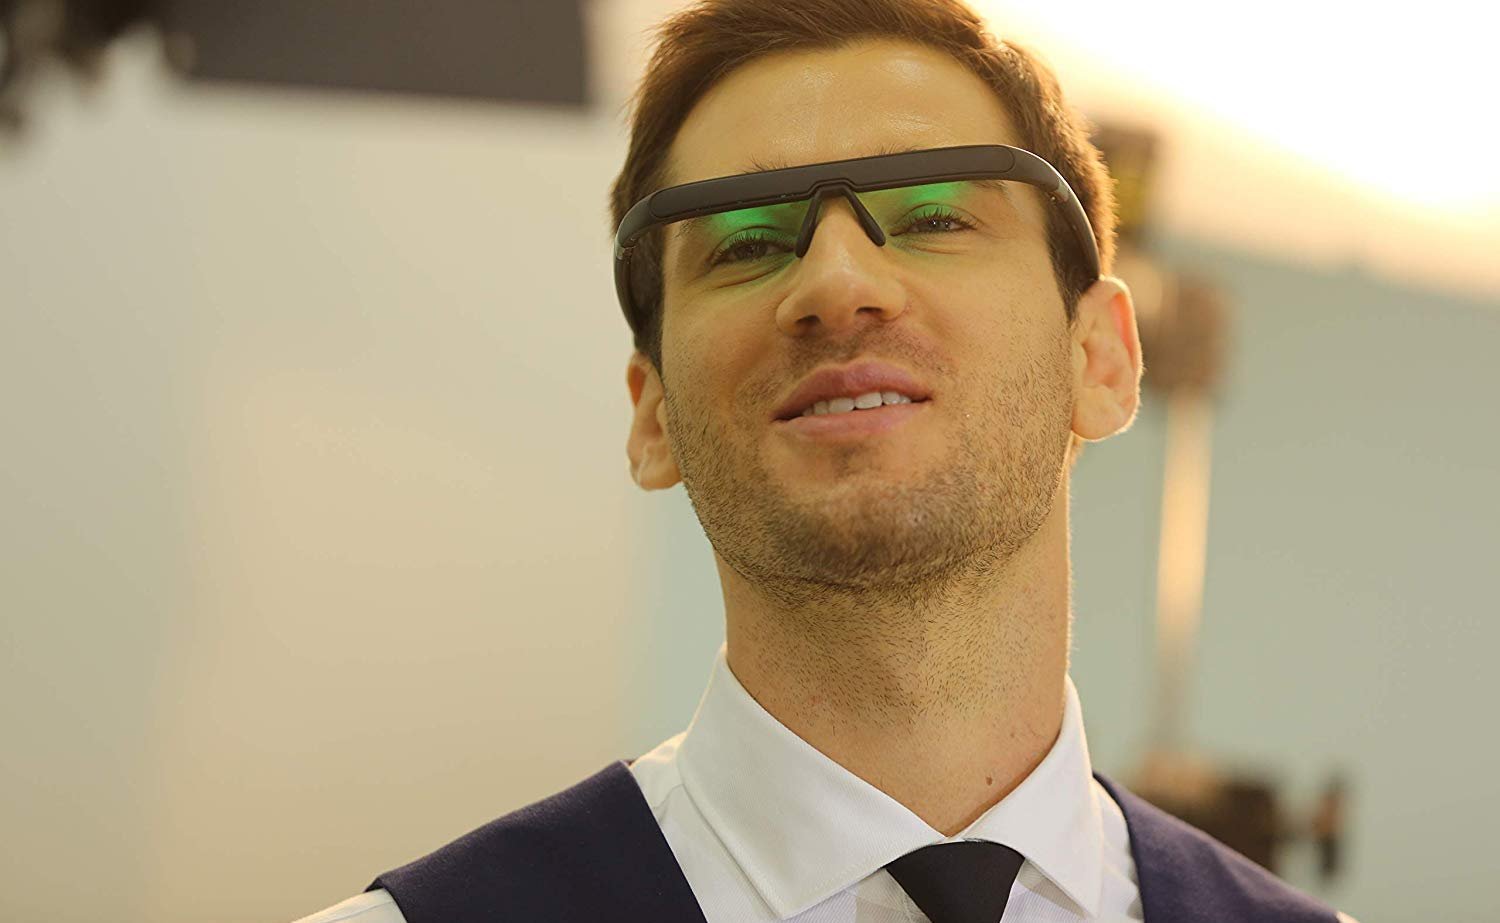 PEGASI 2 Smart Light Therapy Glasses help regulate your circadian rhythm for better sleep